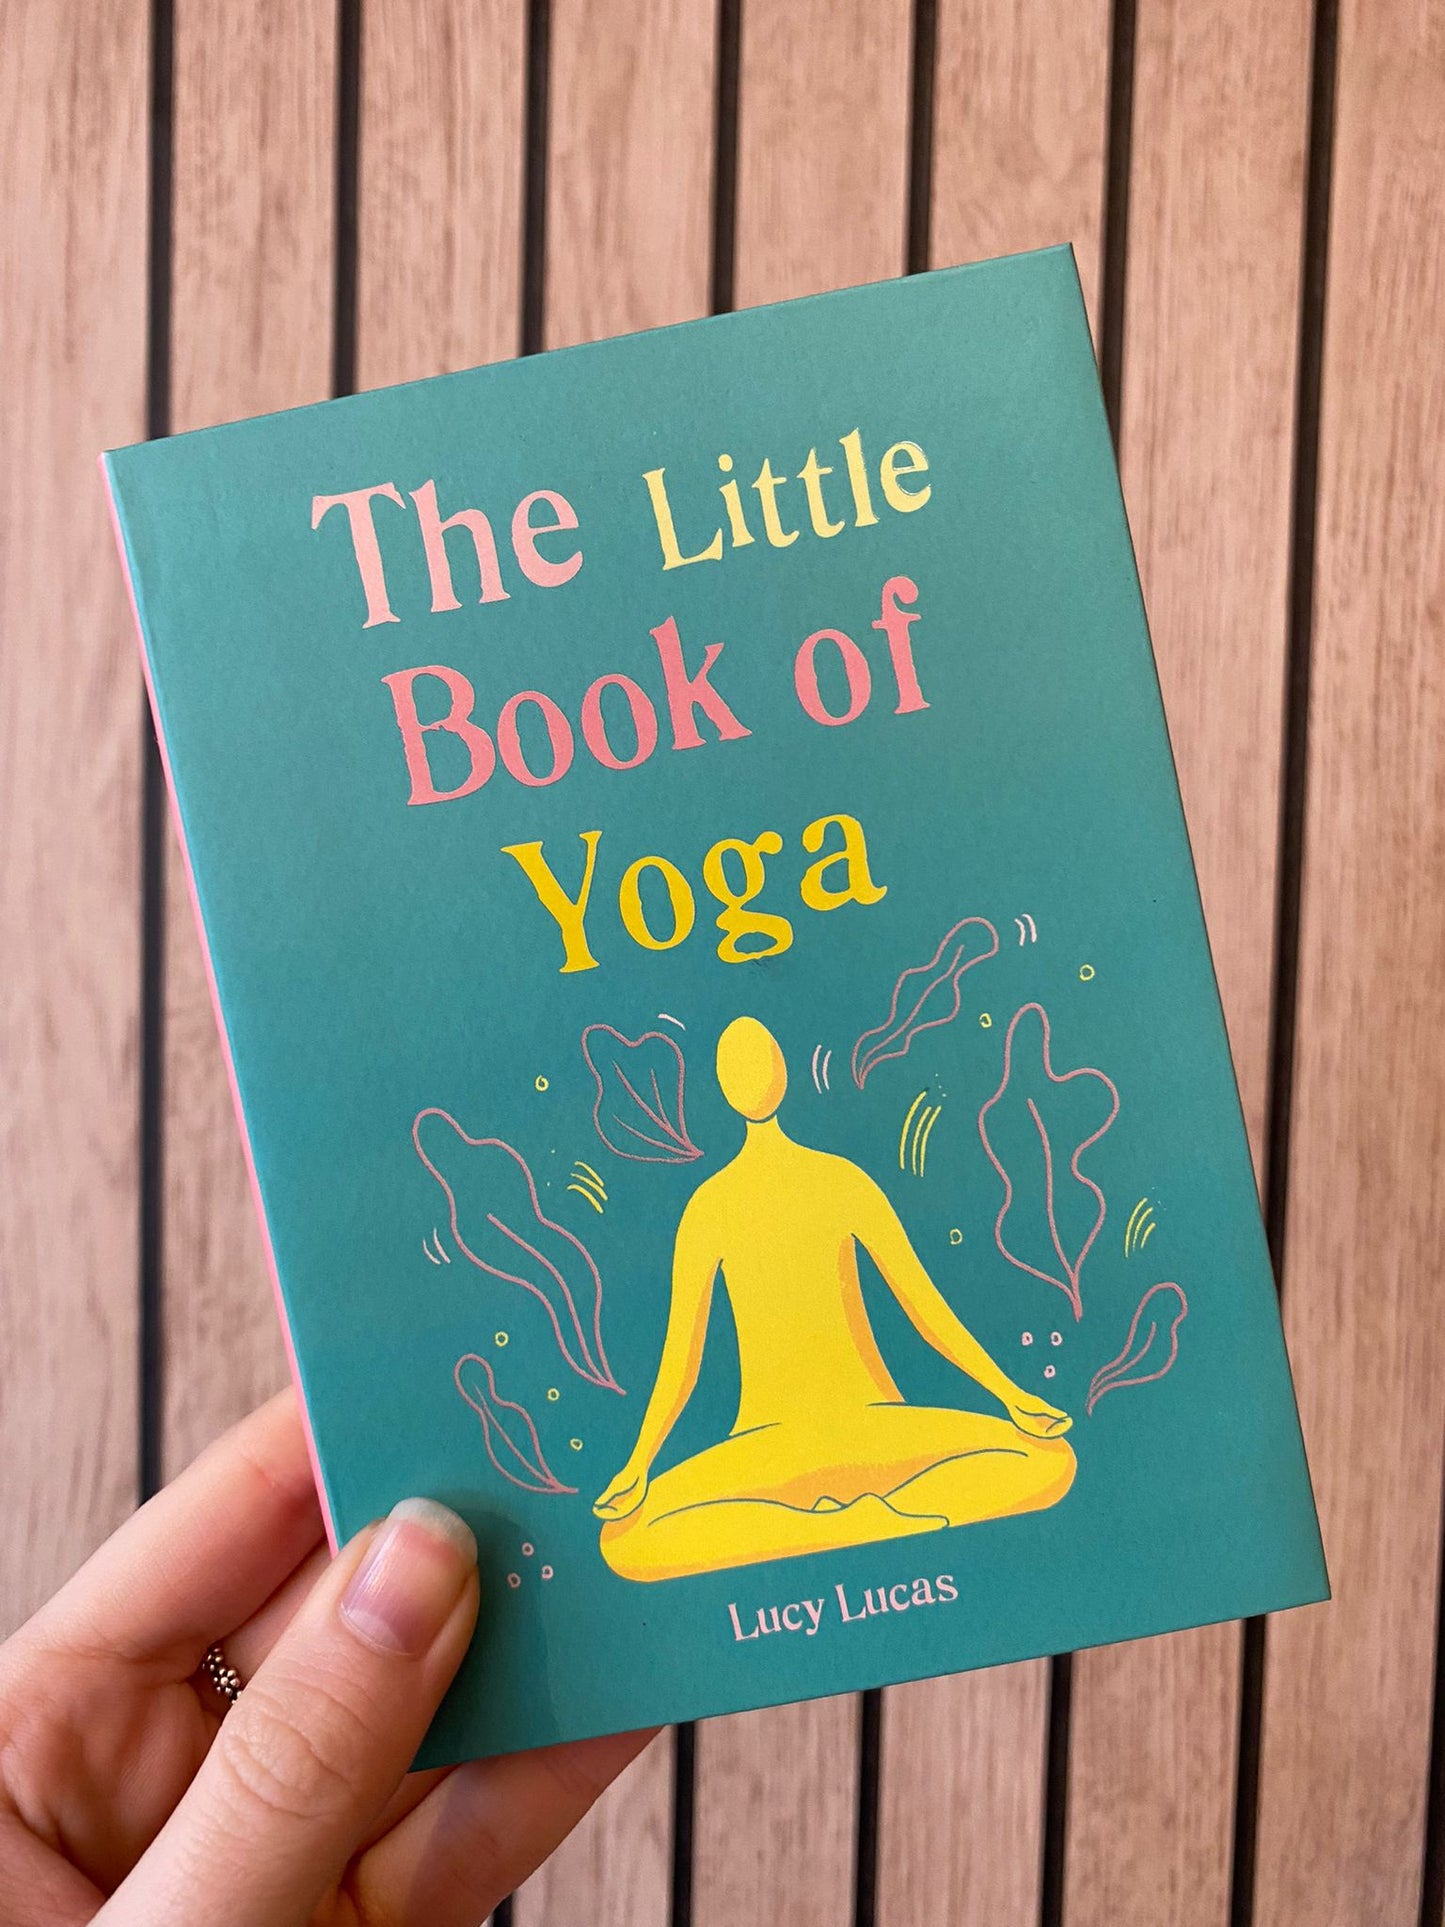 The Little Book of Yoga